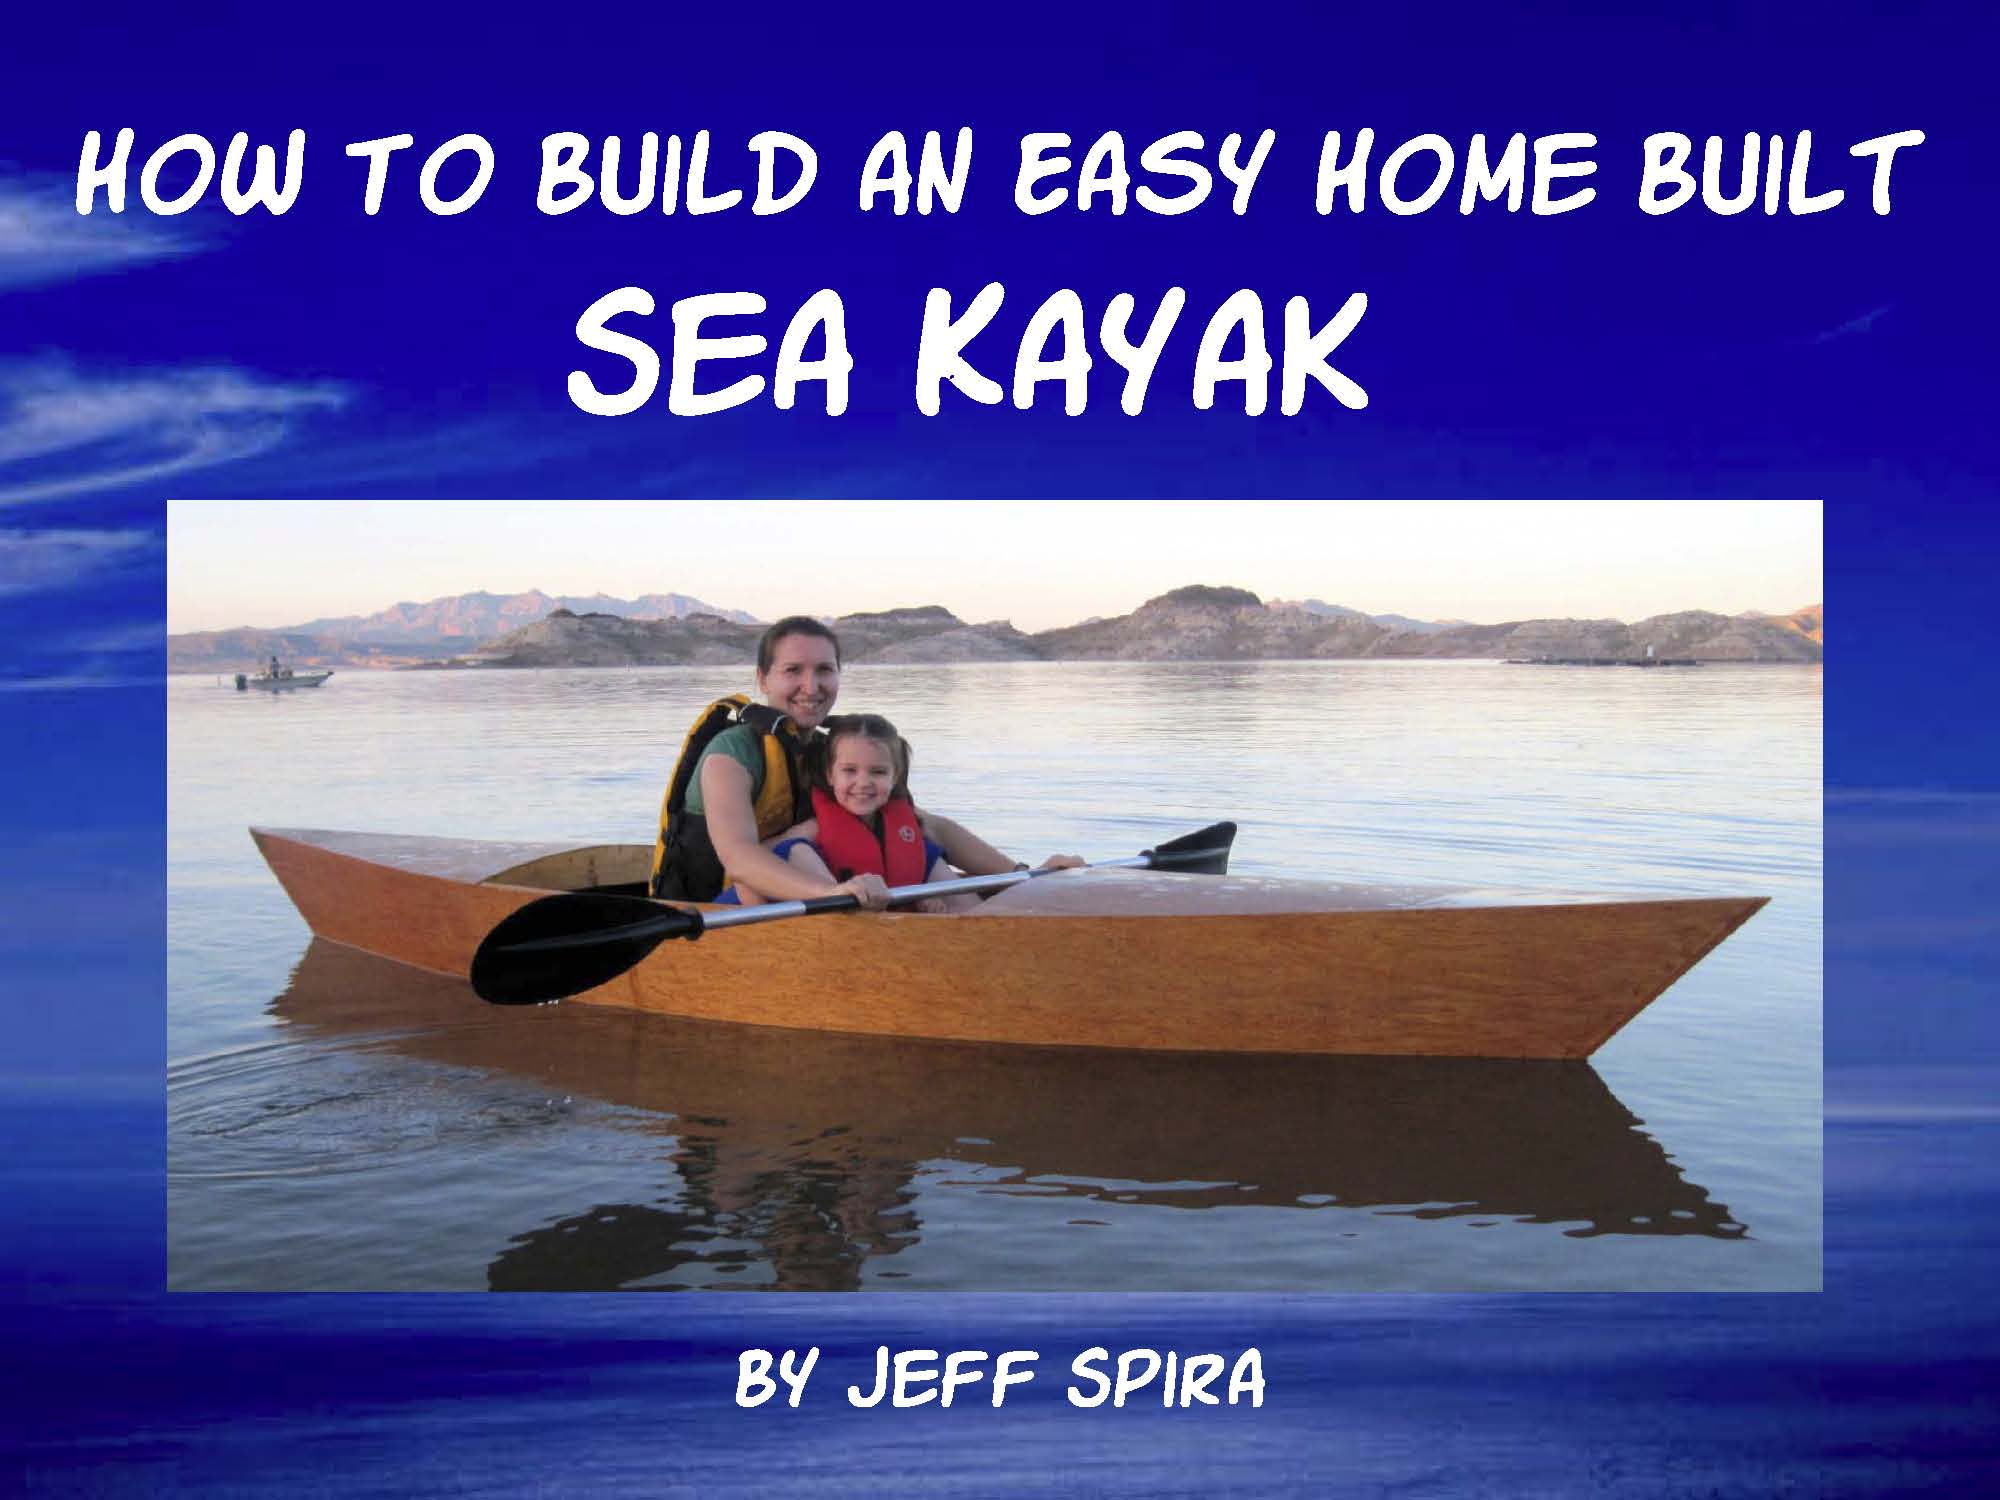 Aluminium Boat Building Company | How To and DIY Building Plans Online 